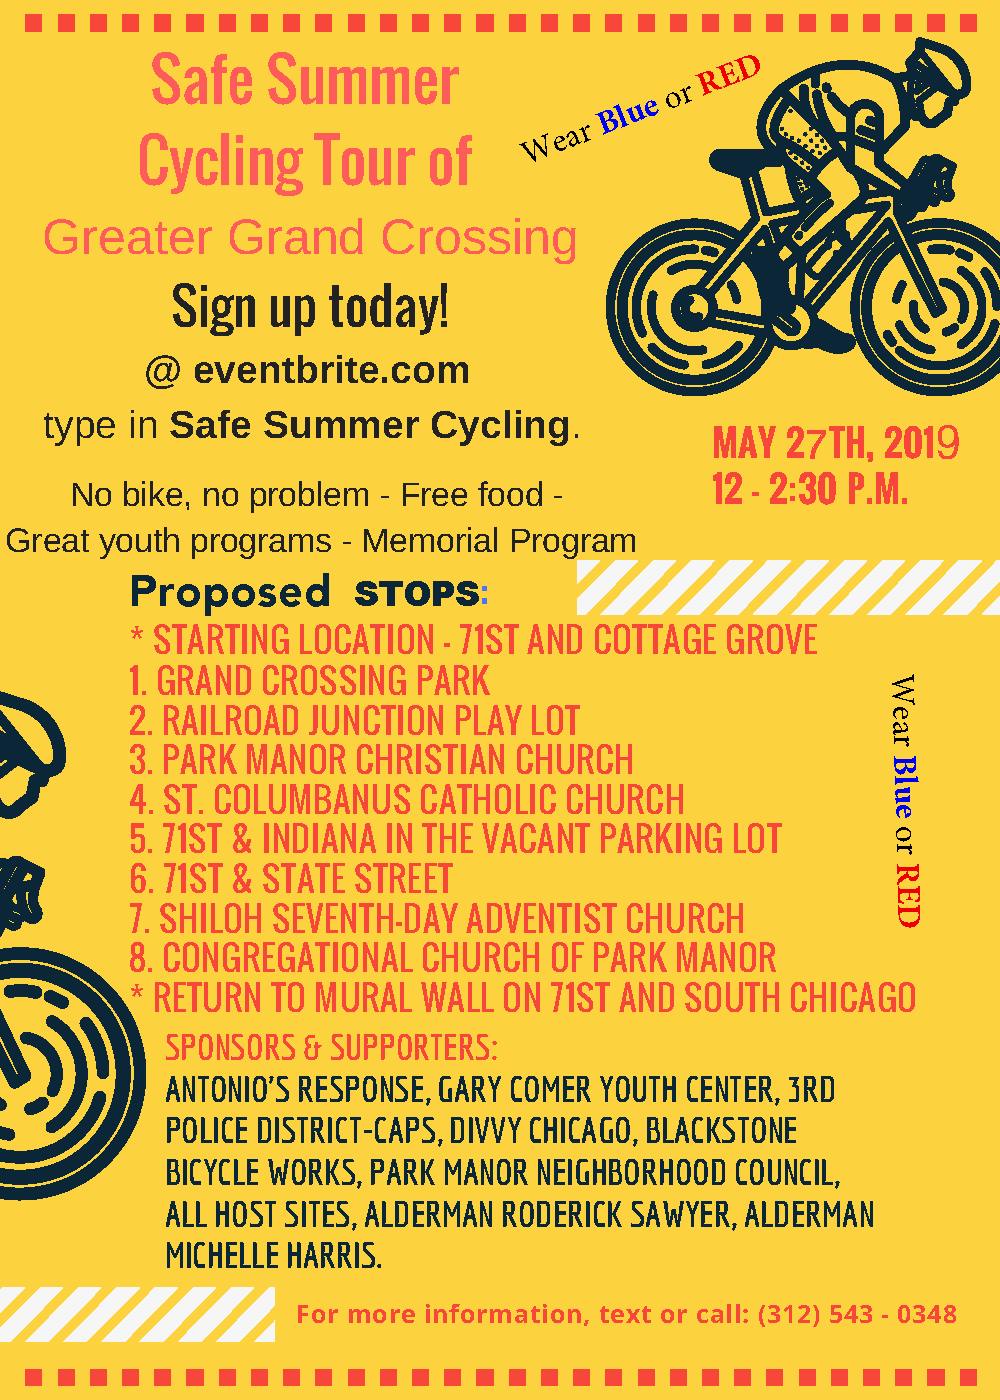 2nd Annual, Safe Summer Cycling Tour of Greater Grand Crossing